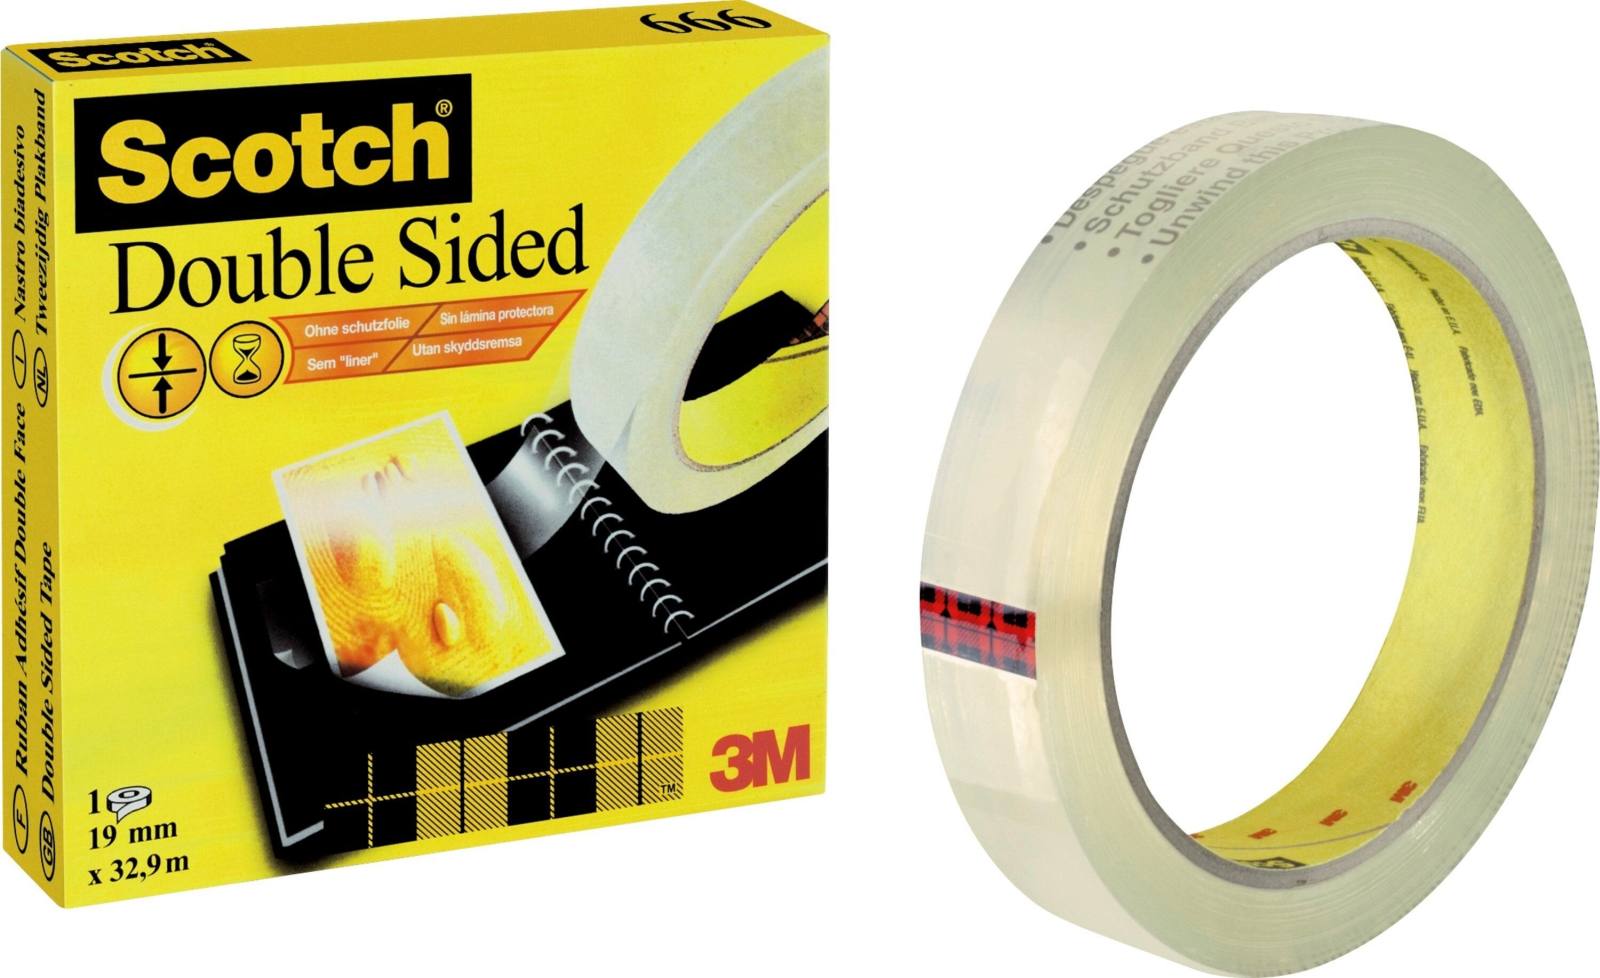 3M Scotch double-sided adhesive tape with 1 roll of 19 mm x 33 m